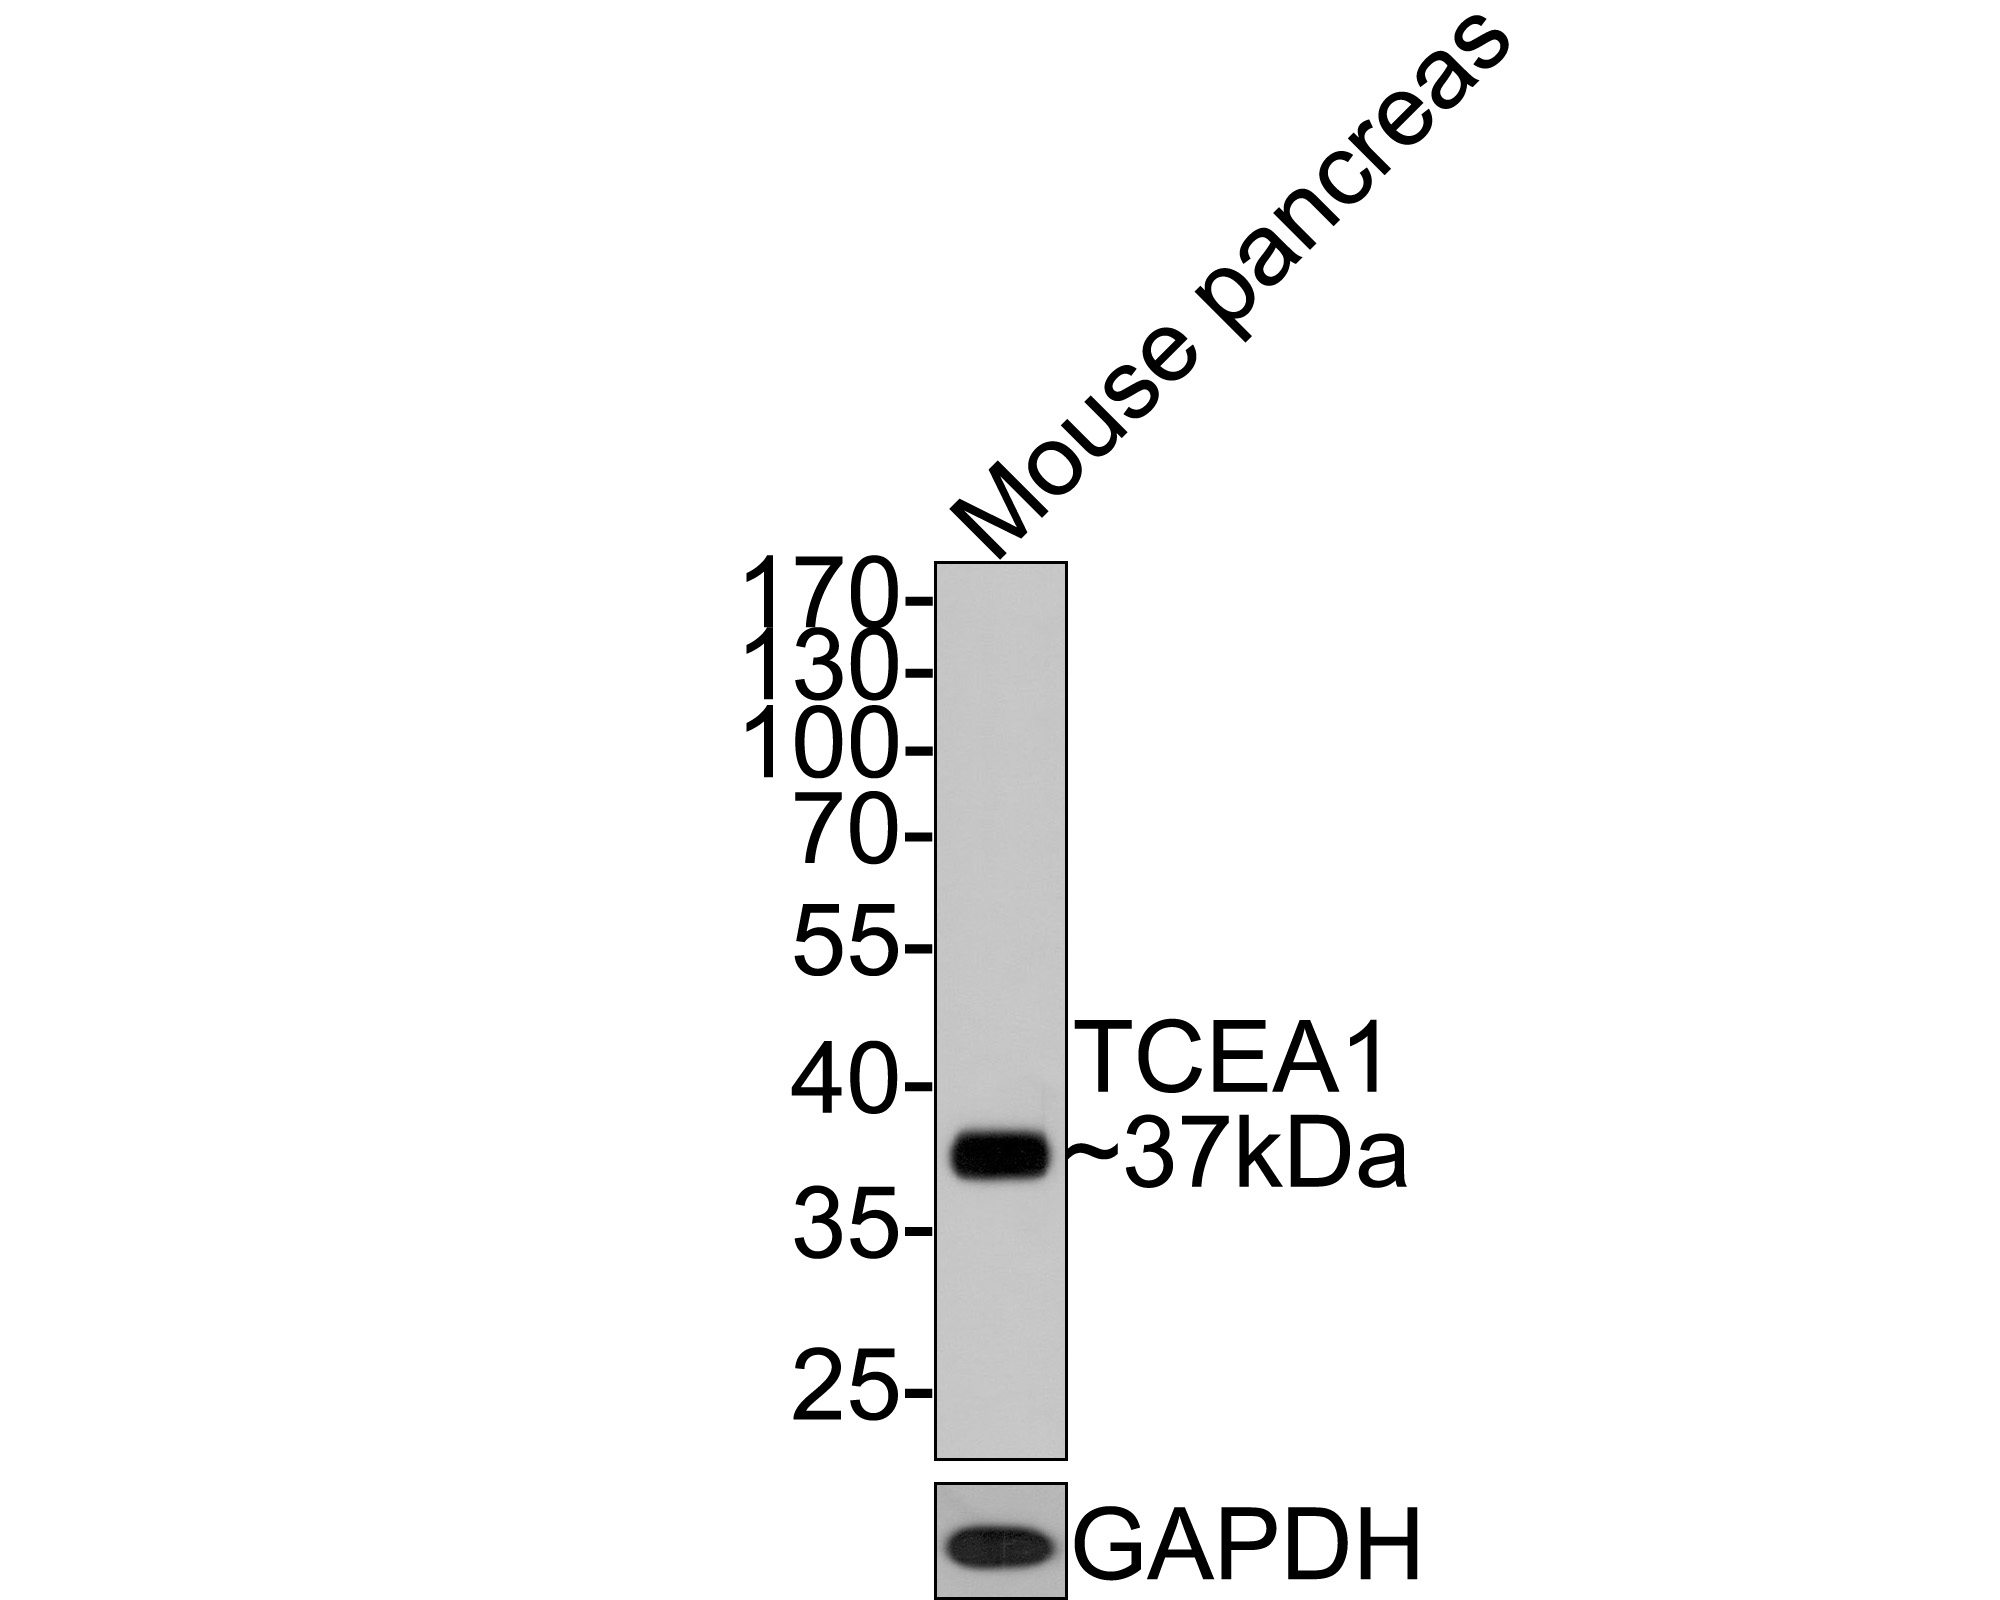 Western blot analysis of TCEA1 on mouse pancreas tissue lysates with Rabbit anti-TCEA1 antibody (HA721086) at 1/2,000 dilution.<br />
<br />
Lysates/proteins at 10 µg/Lane.<br />
<br />
Predicted band size: 34 kDa<br />
Observed band size: 37 kDa<br />
<br />
Exposure time: 2 minutes;<br />
<br />
10% SDS-PAGE gel.<br />
<br />
Proteins were transferred to a PVDF membrane and blocked with 5% NFDM/TBST for 1 hour at room temperature. The primary antibody (HA721086) at 1/2,000 dilution was used in 5% NFDM/TBST at room temperature for 2 hours. Goat Anti-Rabbit IgG - HRP Secondary Antibody (HA1001) at 1:300,000 dilution was used for 1 hour at room temperature.